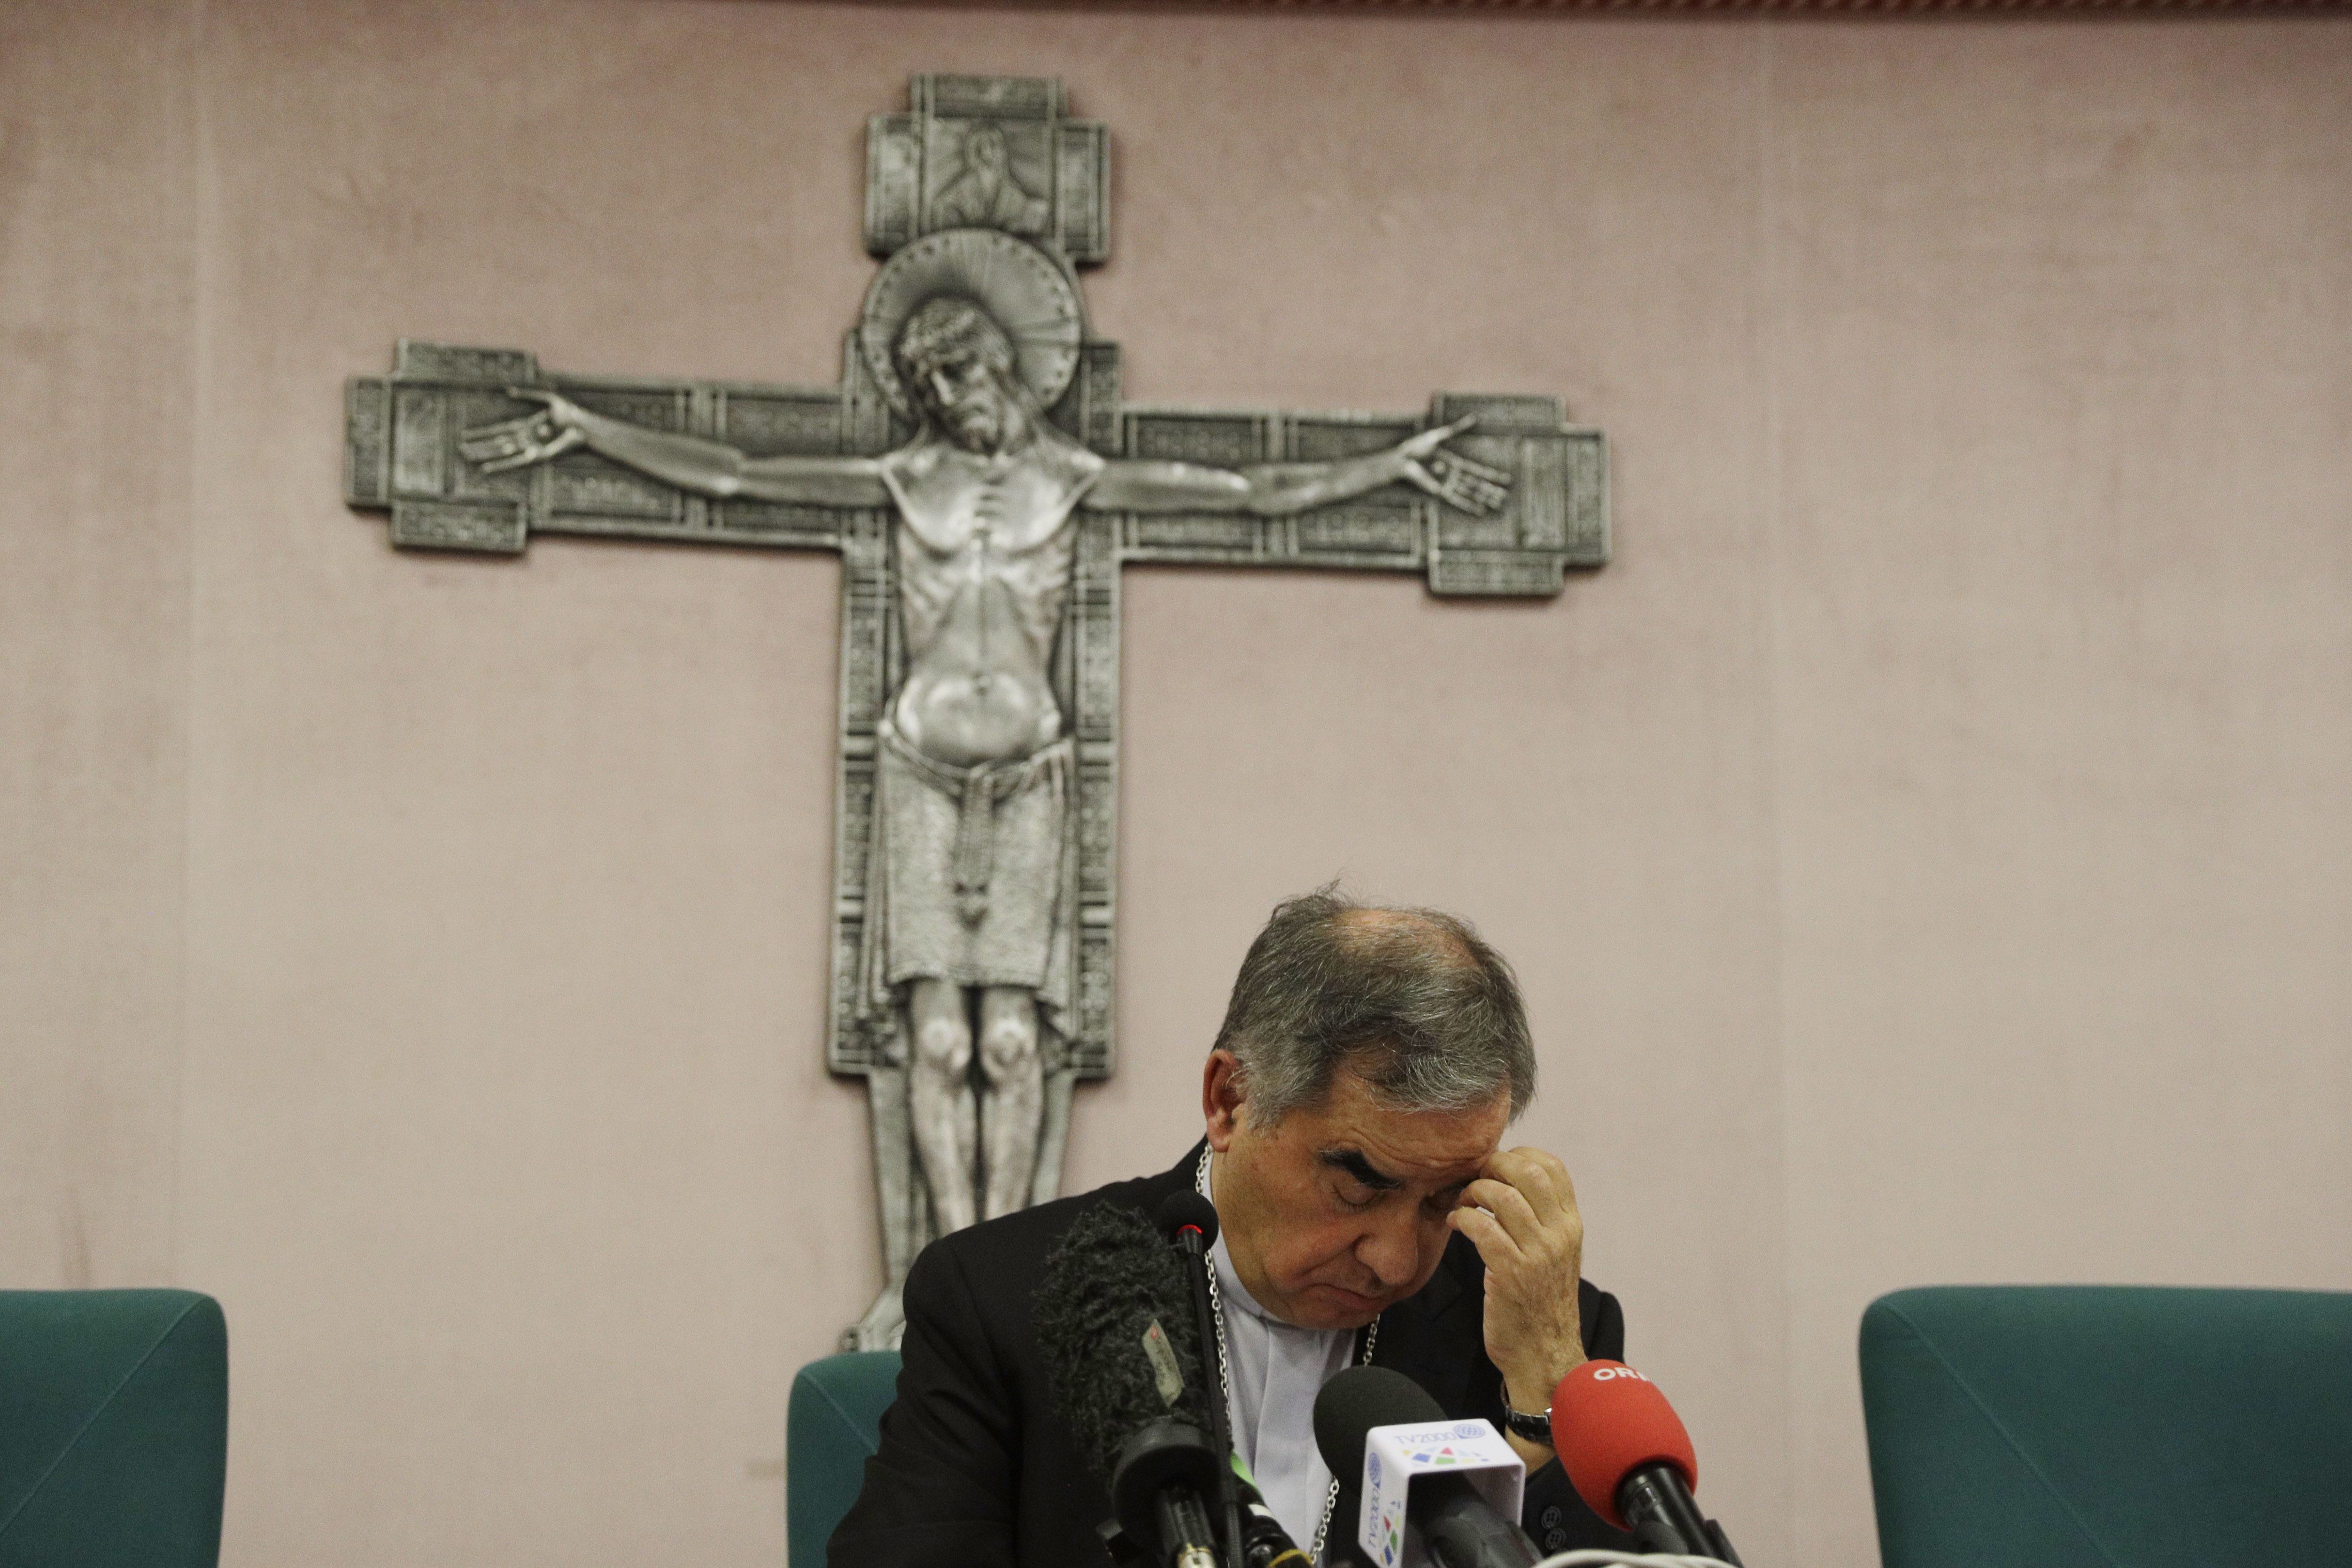 Cardinal Angelo Becciu talks to journalists during a press conference in Rome, on Sept. 25, 2020. (AP Photo/Gregorio Borgia, File)